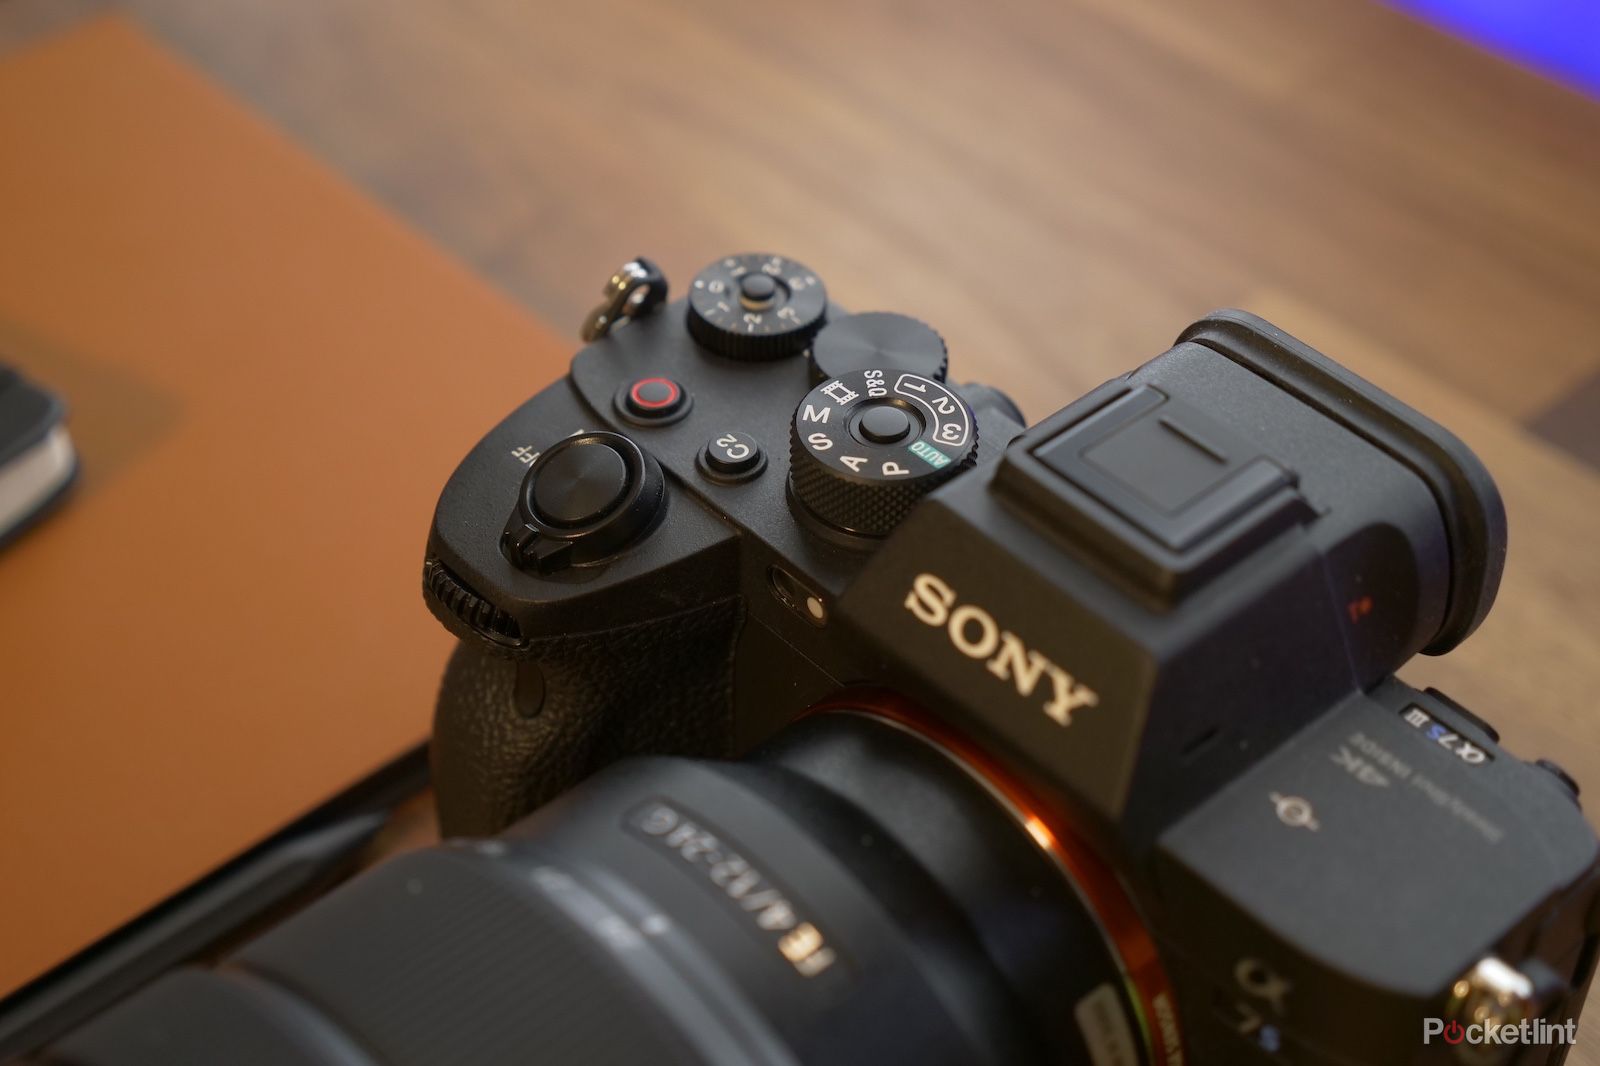 Sony Alpha A7 IV camera specs leaked by, er, Sony itself photo 2